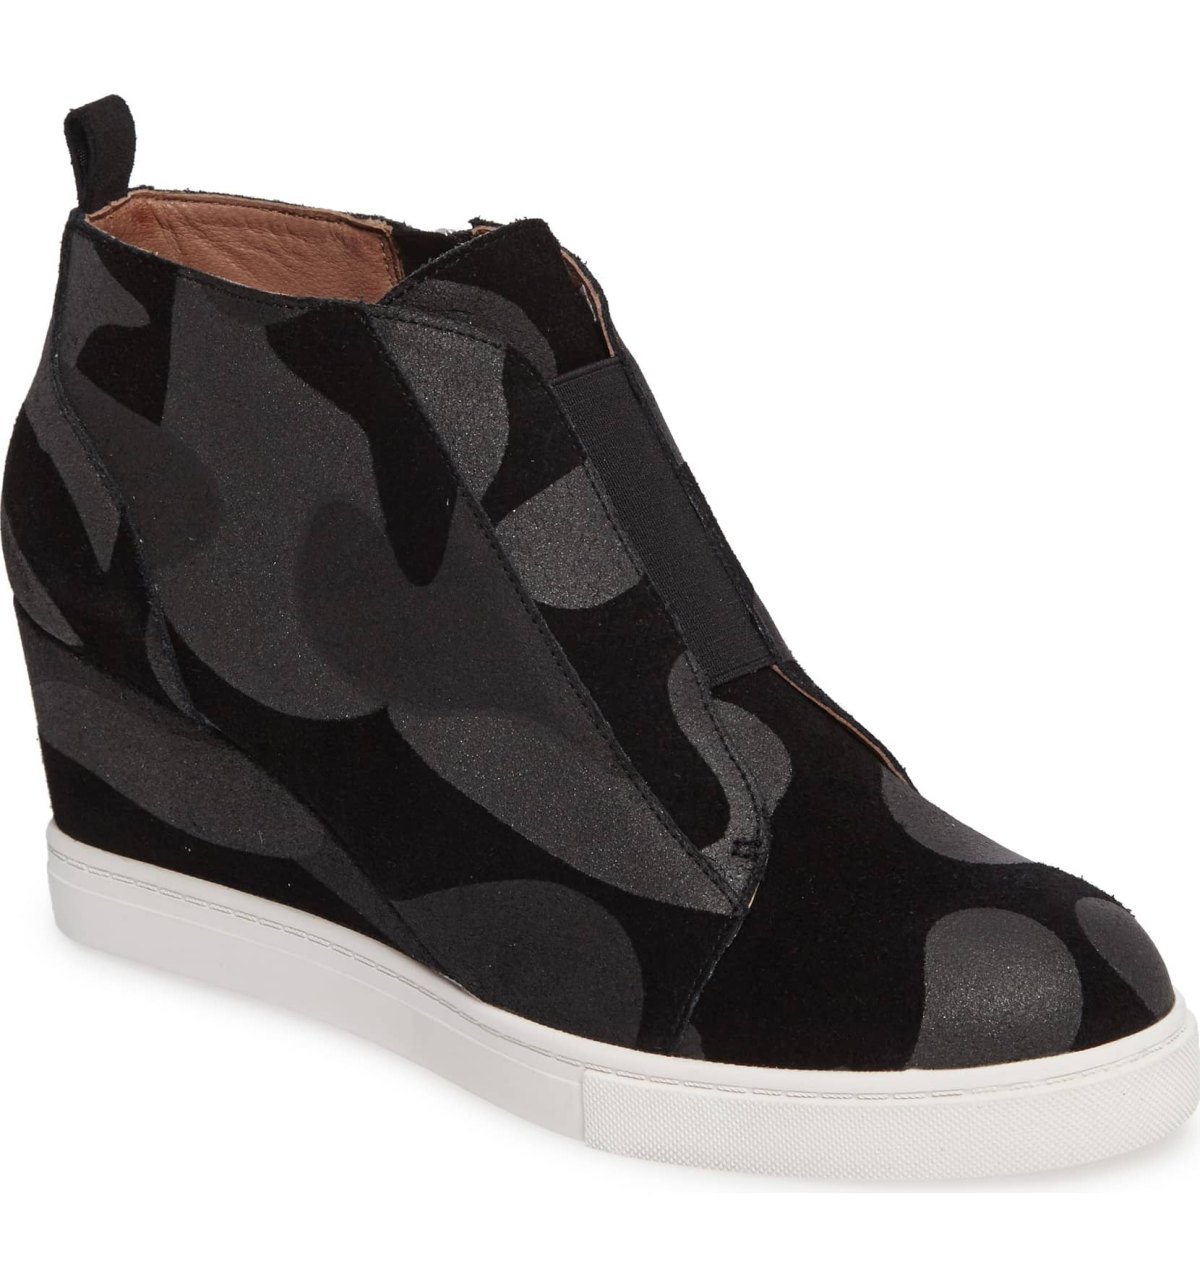 Shop These Sporty Wedge Booties on Sale at Nordstrom